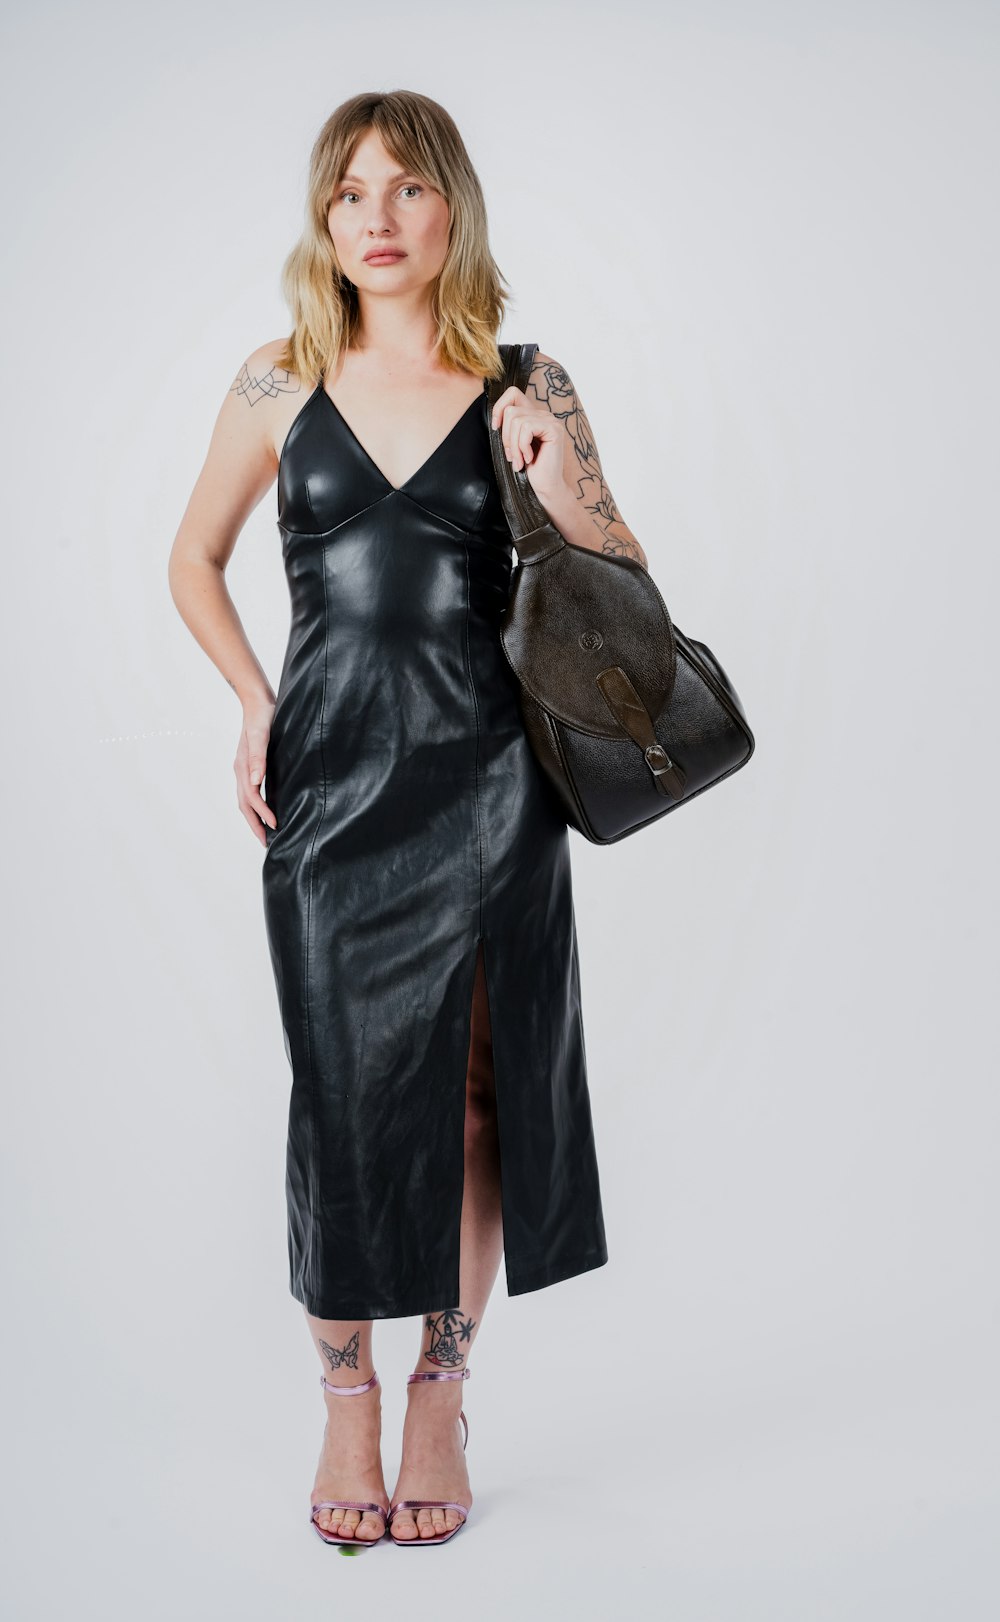 a woman in a black leather dress holding a handbag